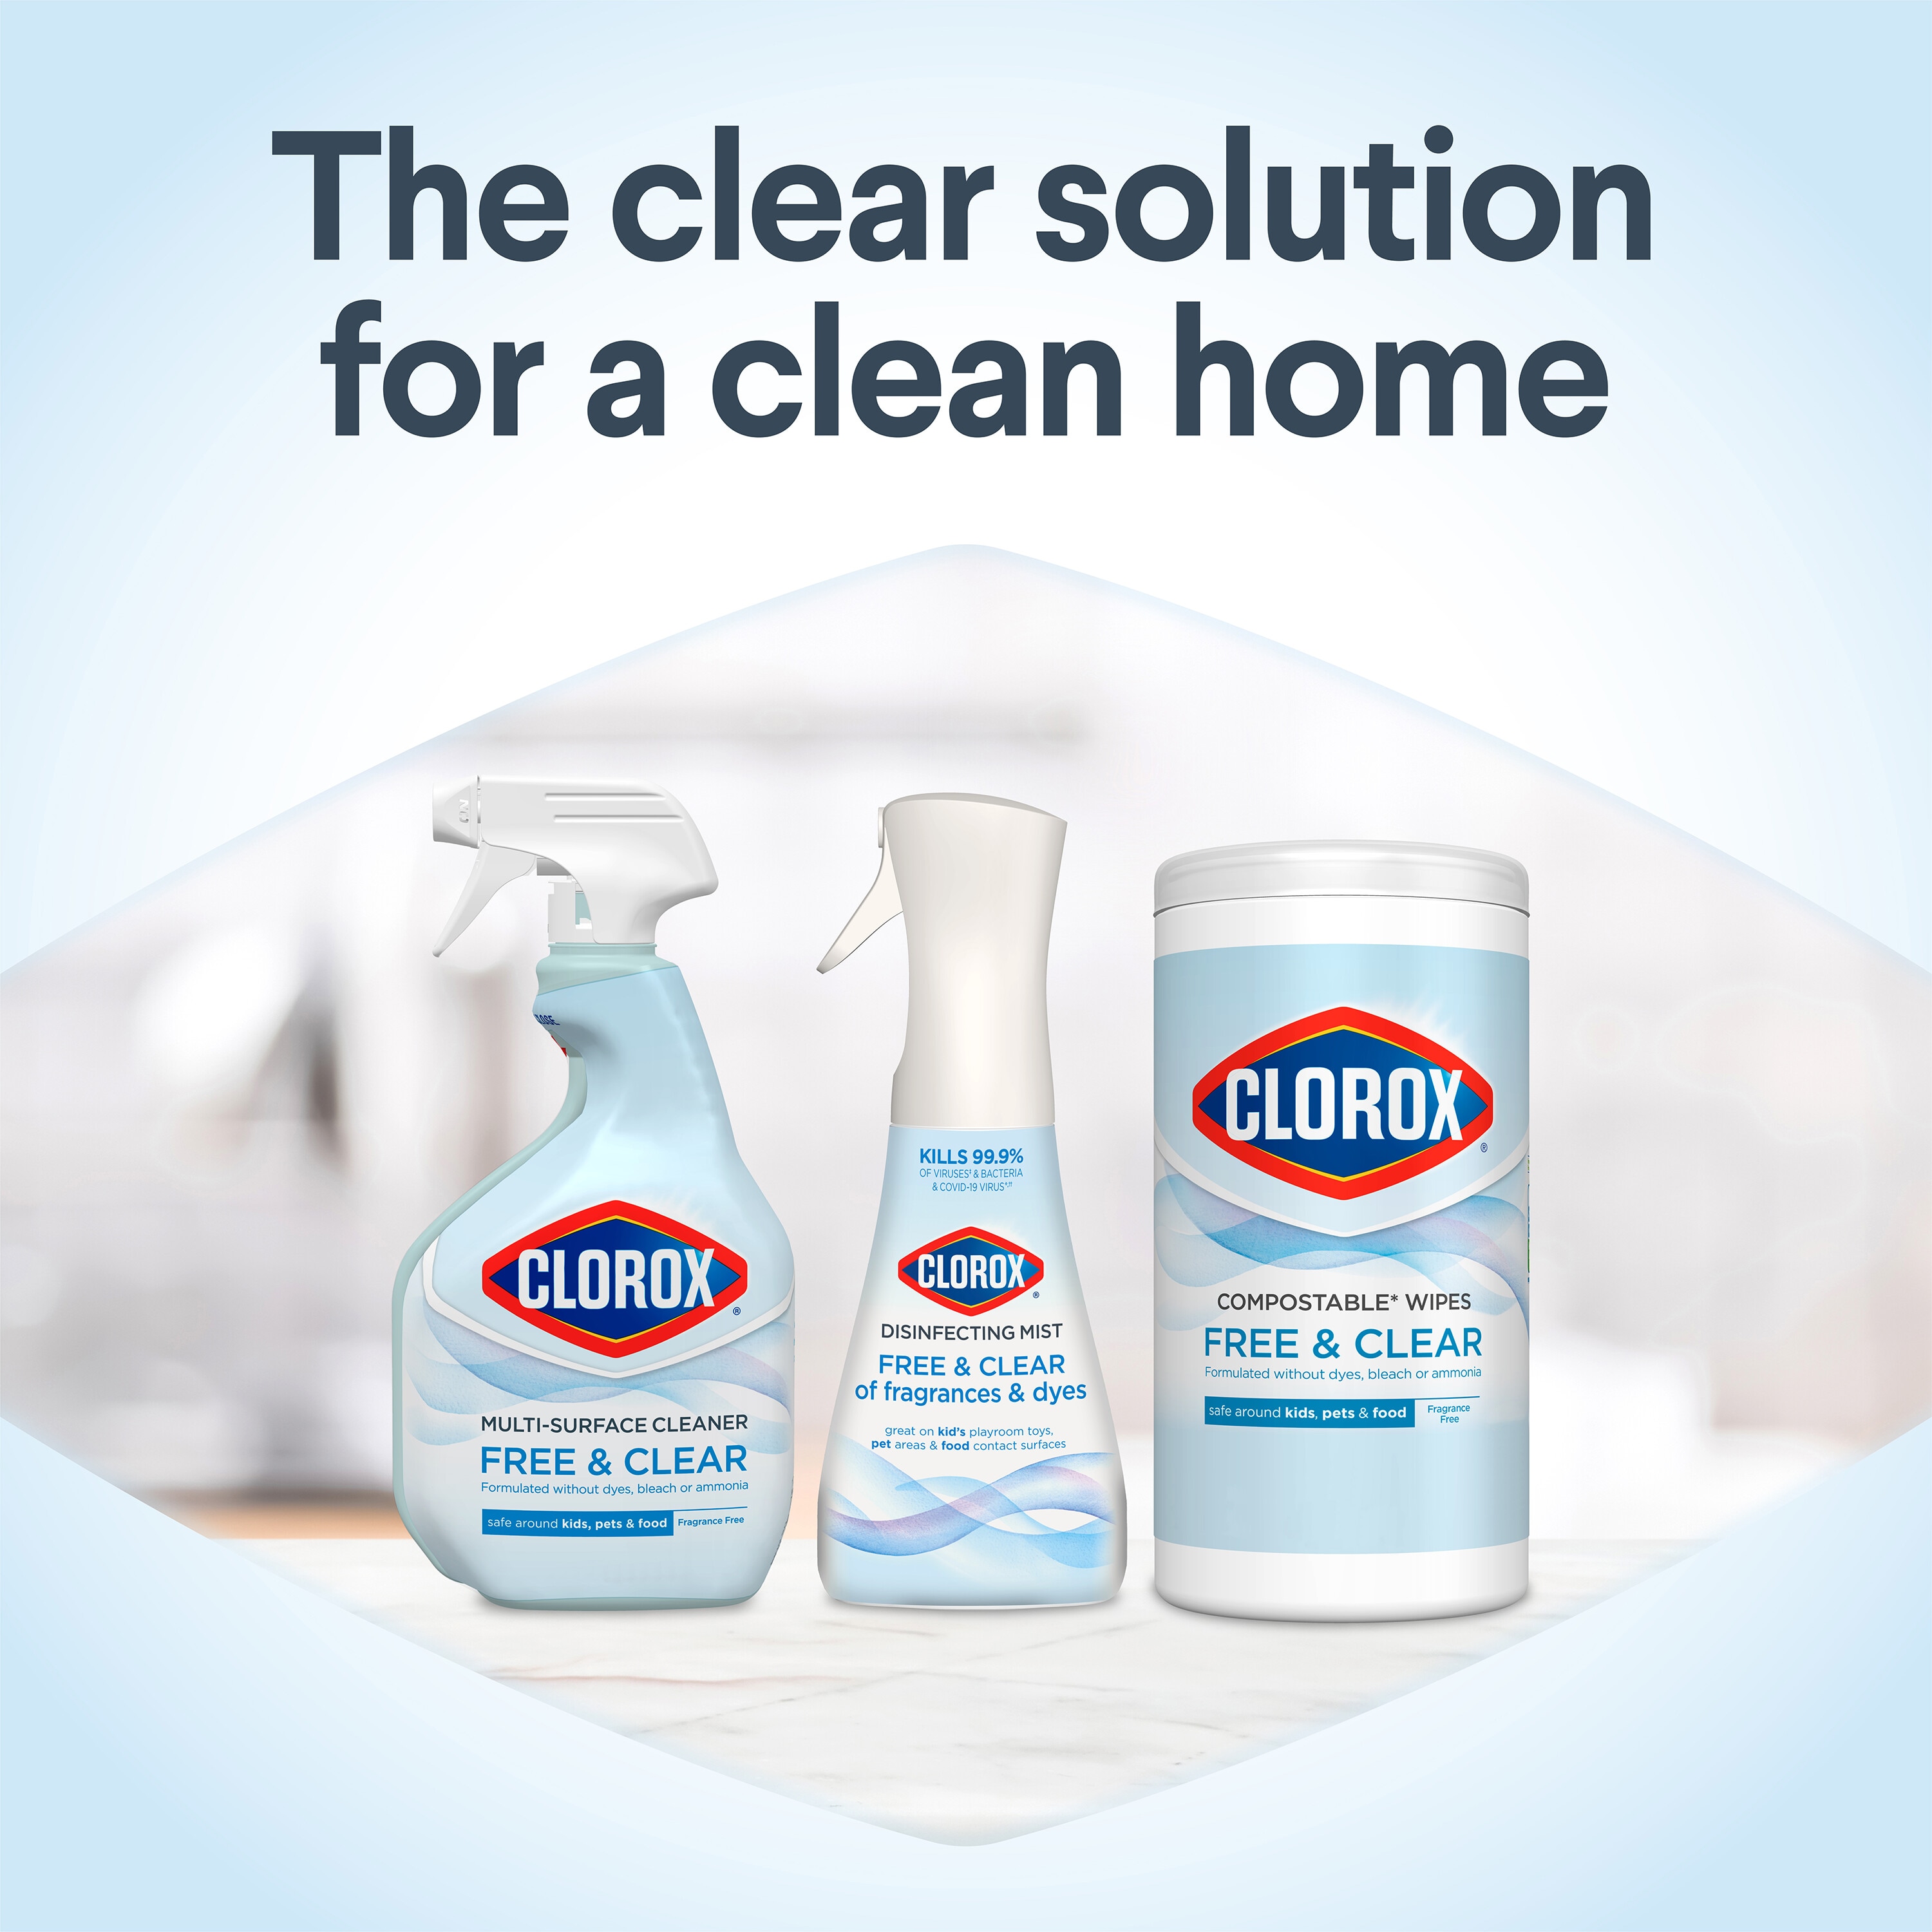 Clorox Free & Clear Fragrance Free Household Cleaning Supplies